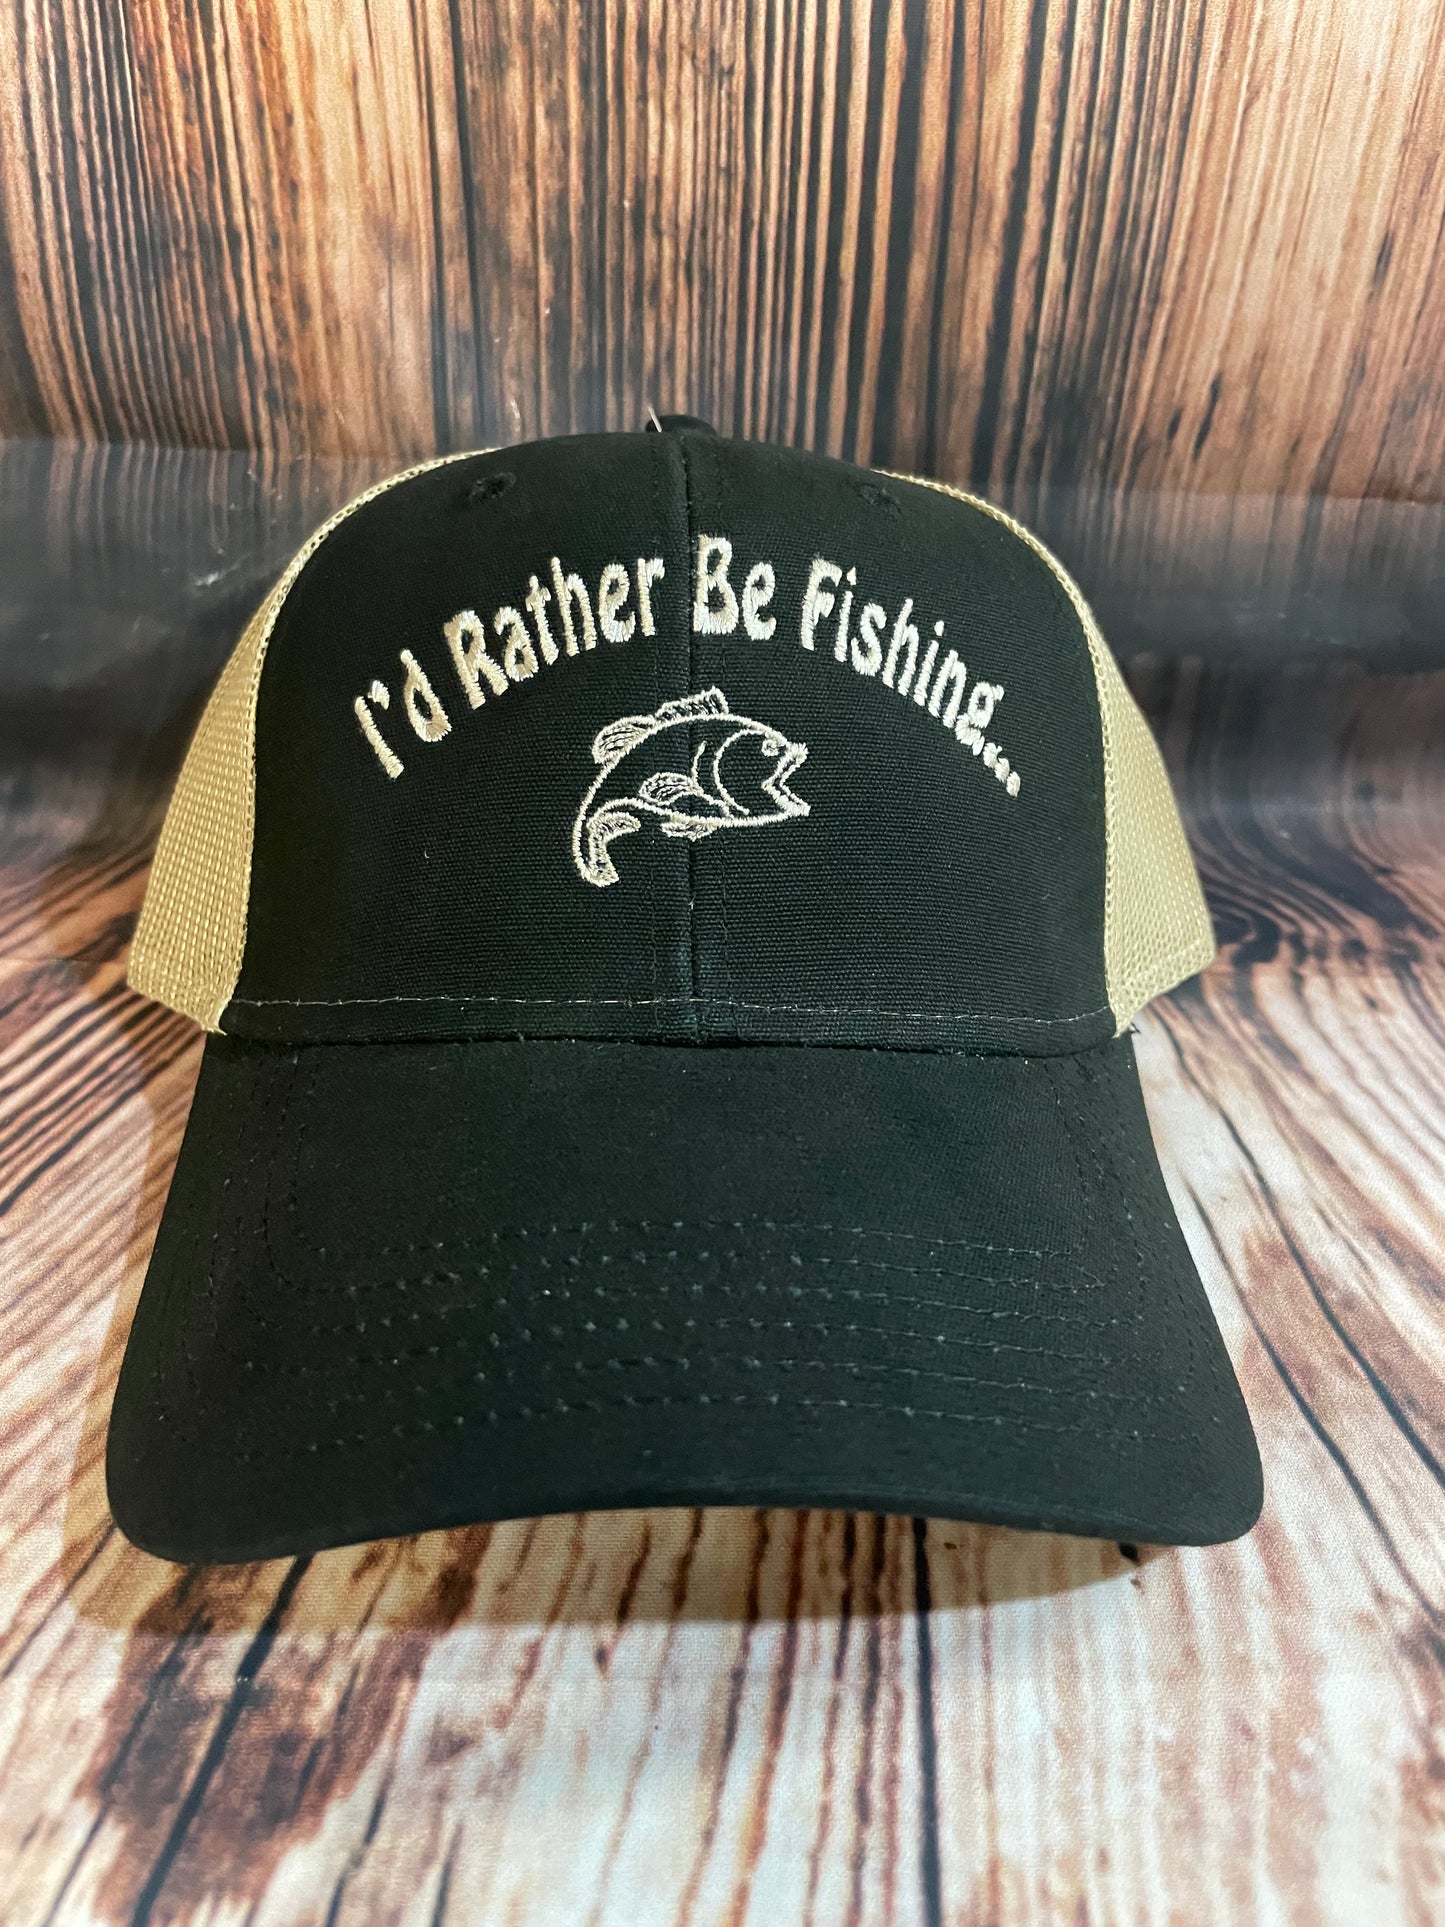 "I'd Rather Be Fishing" Trucker Hat